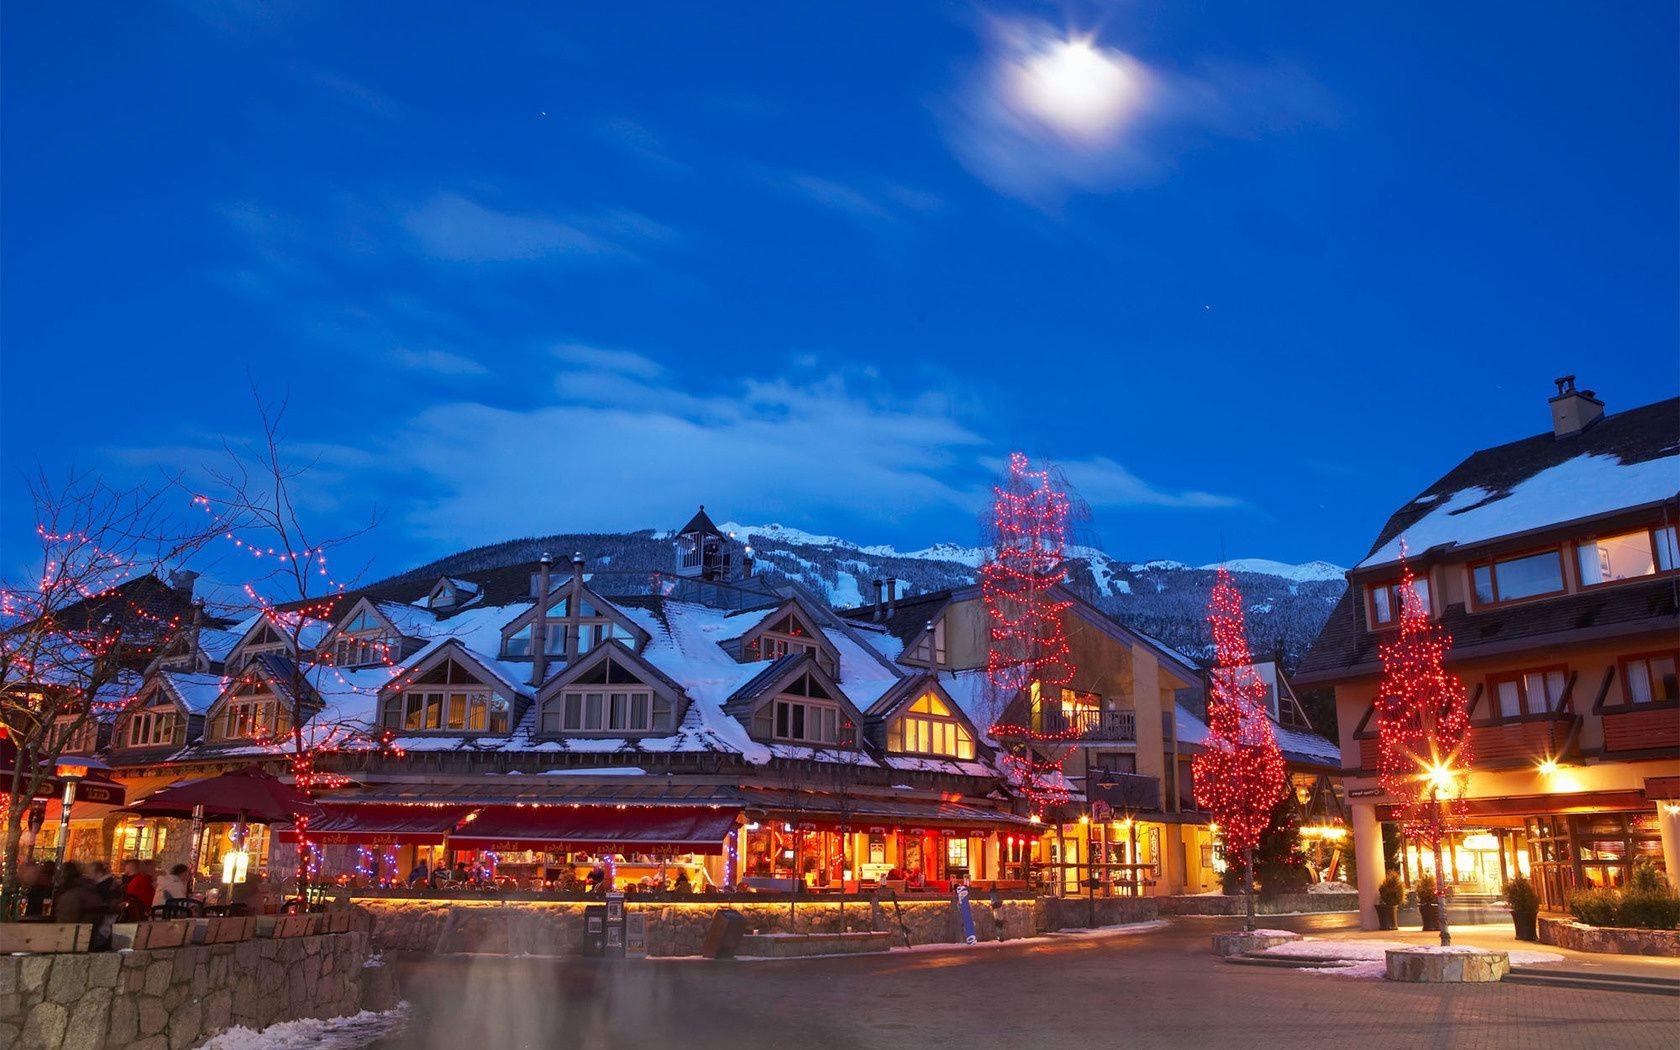 City city whistler canada. Android wallpaper for free